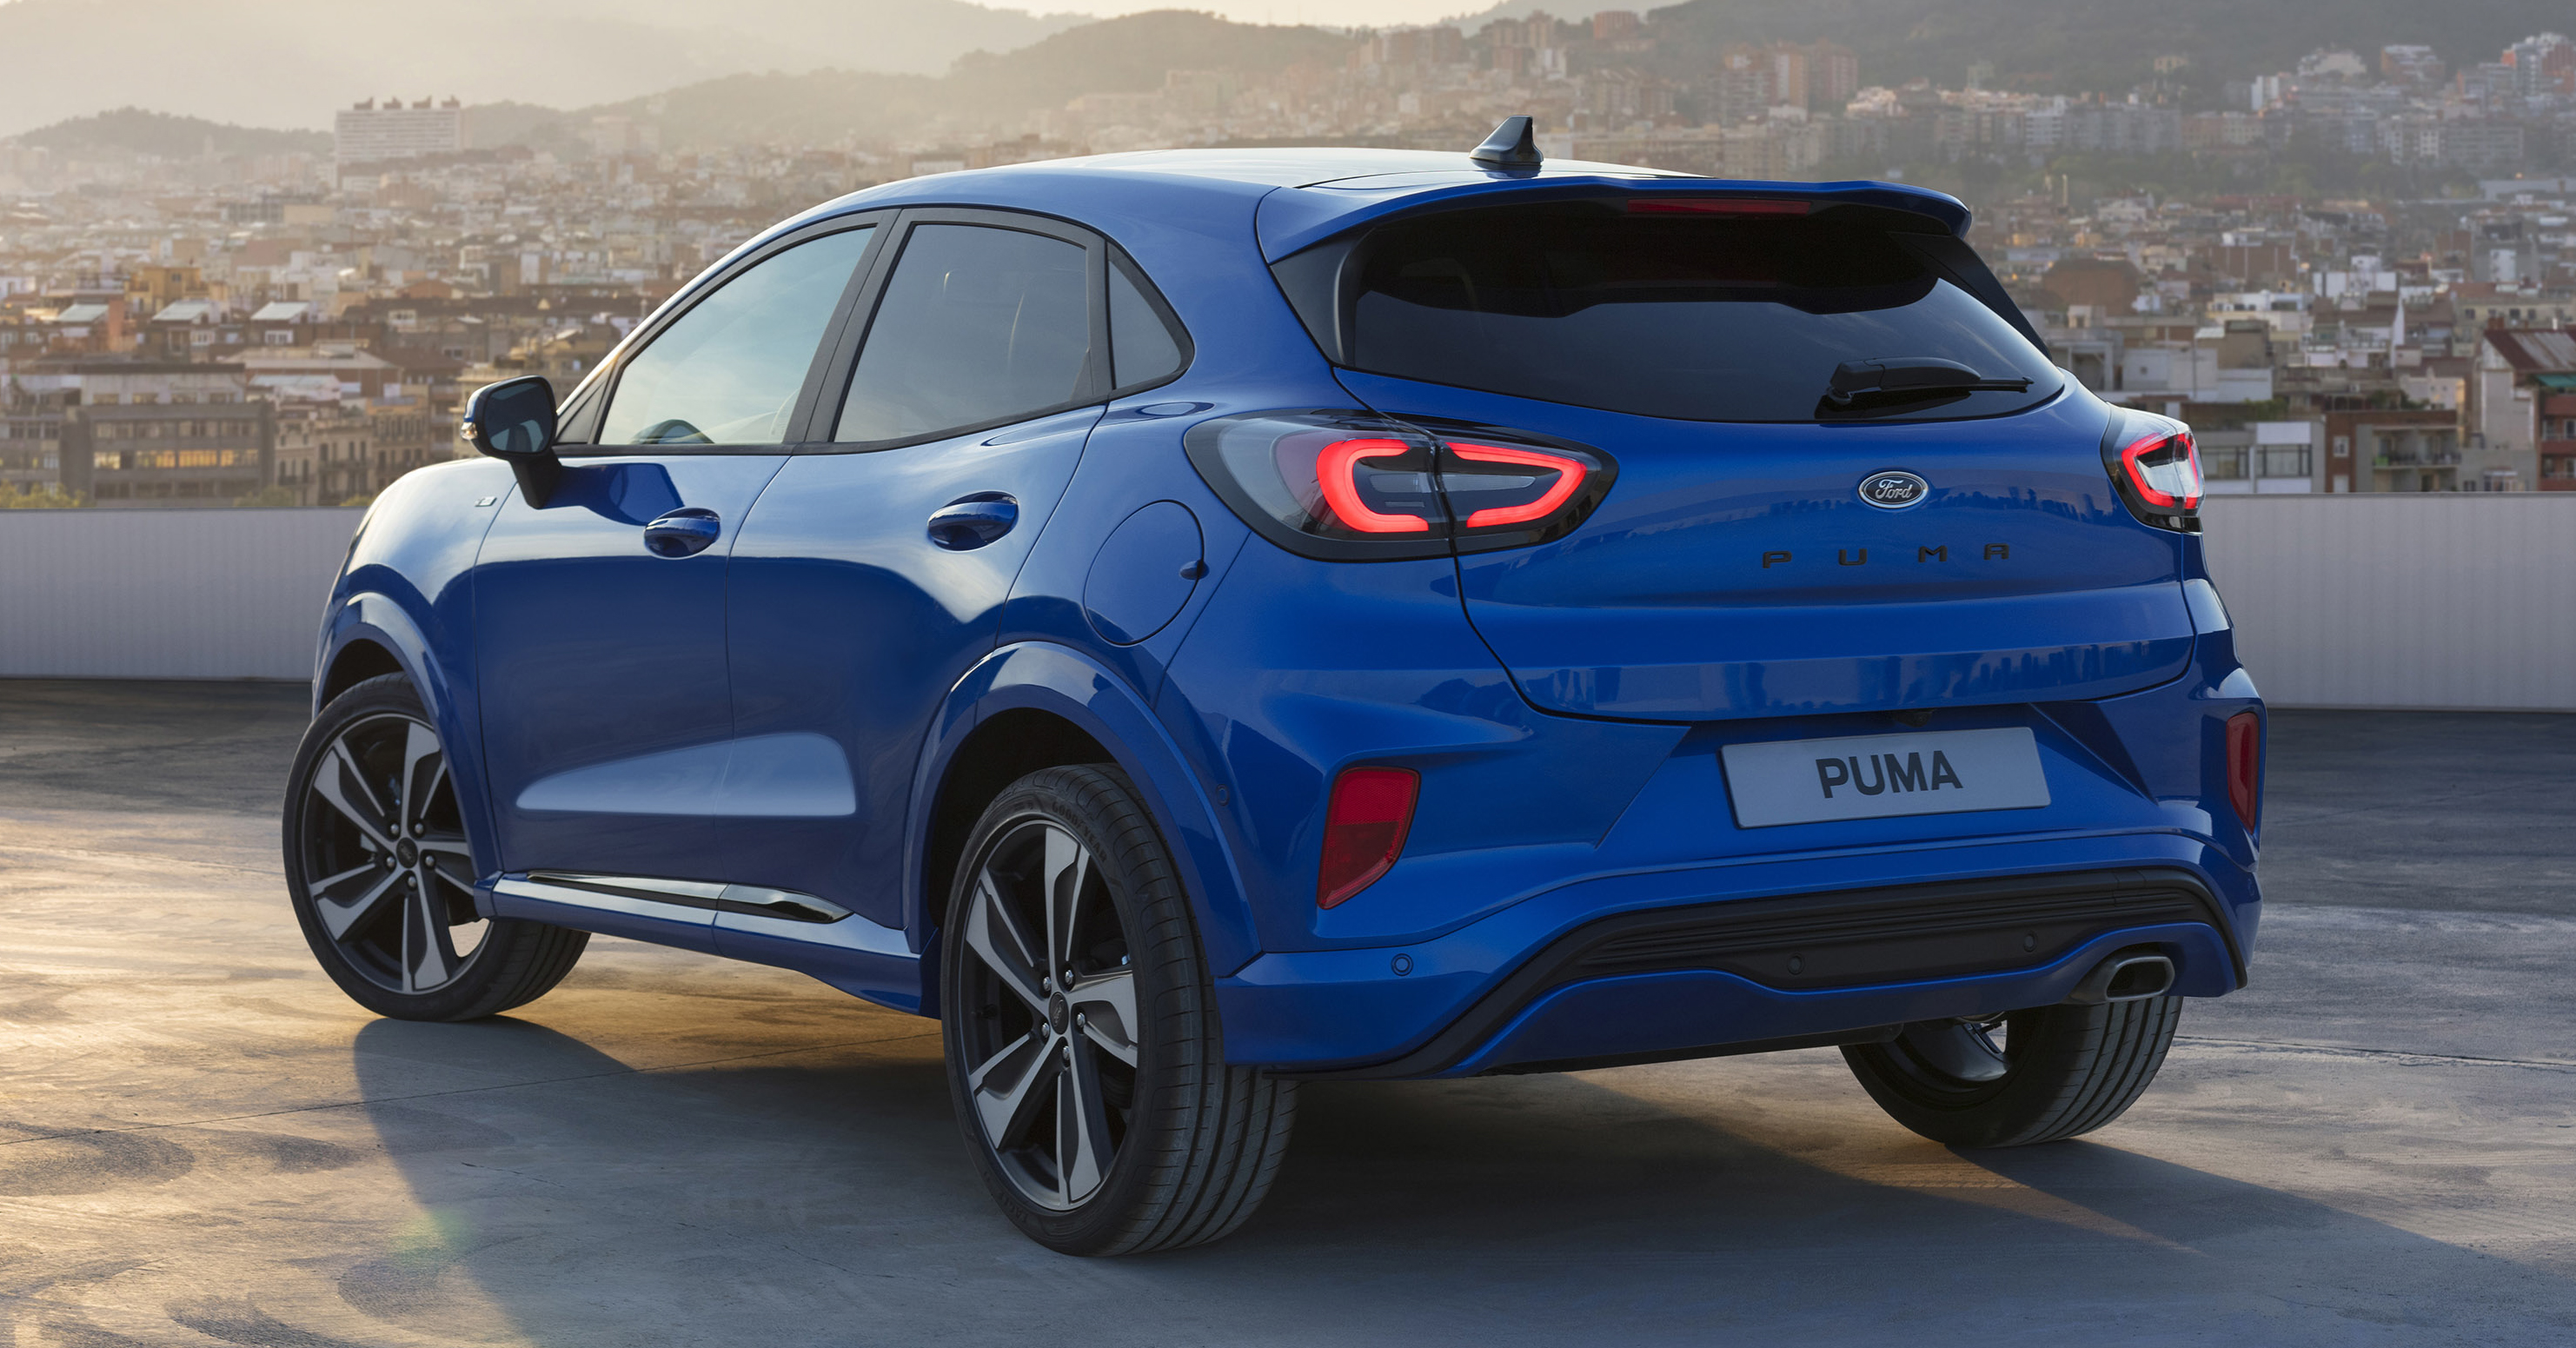 2019 Ford Puma SUV unveiled – new 1.0L EcoBoost Hybrid, flexible boot